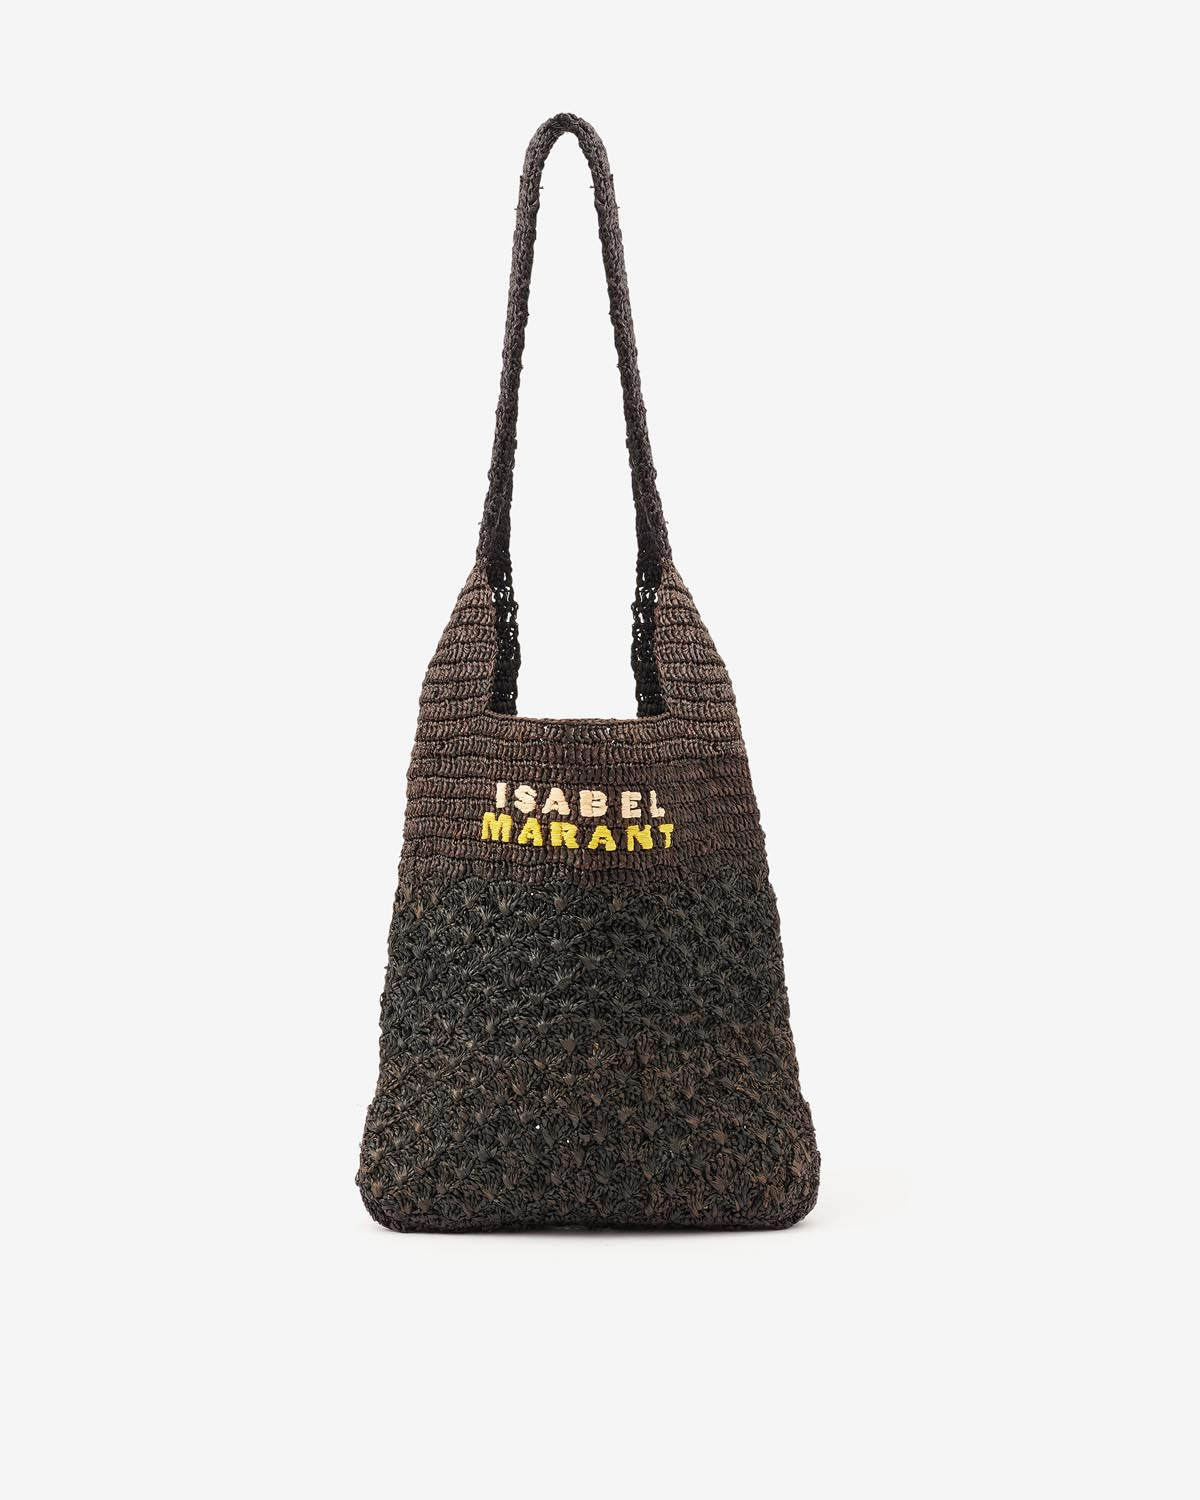 ISABEL MARANT Official Online Store | Ready-to-wear, Shoes and Bags